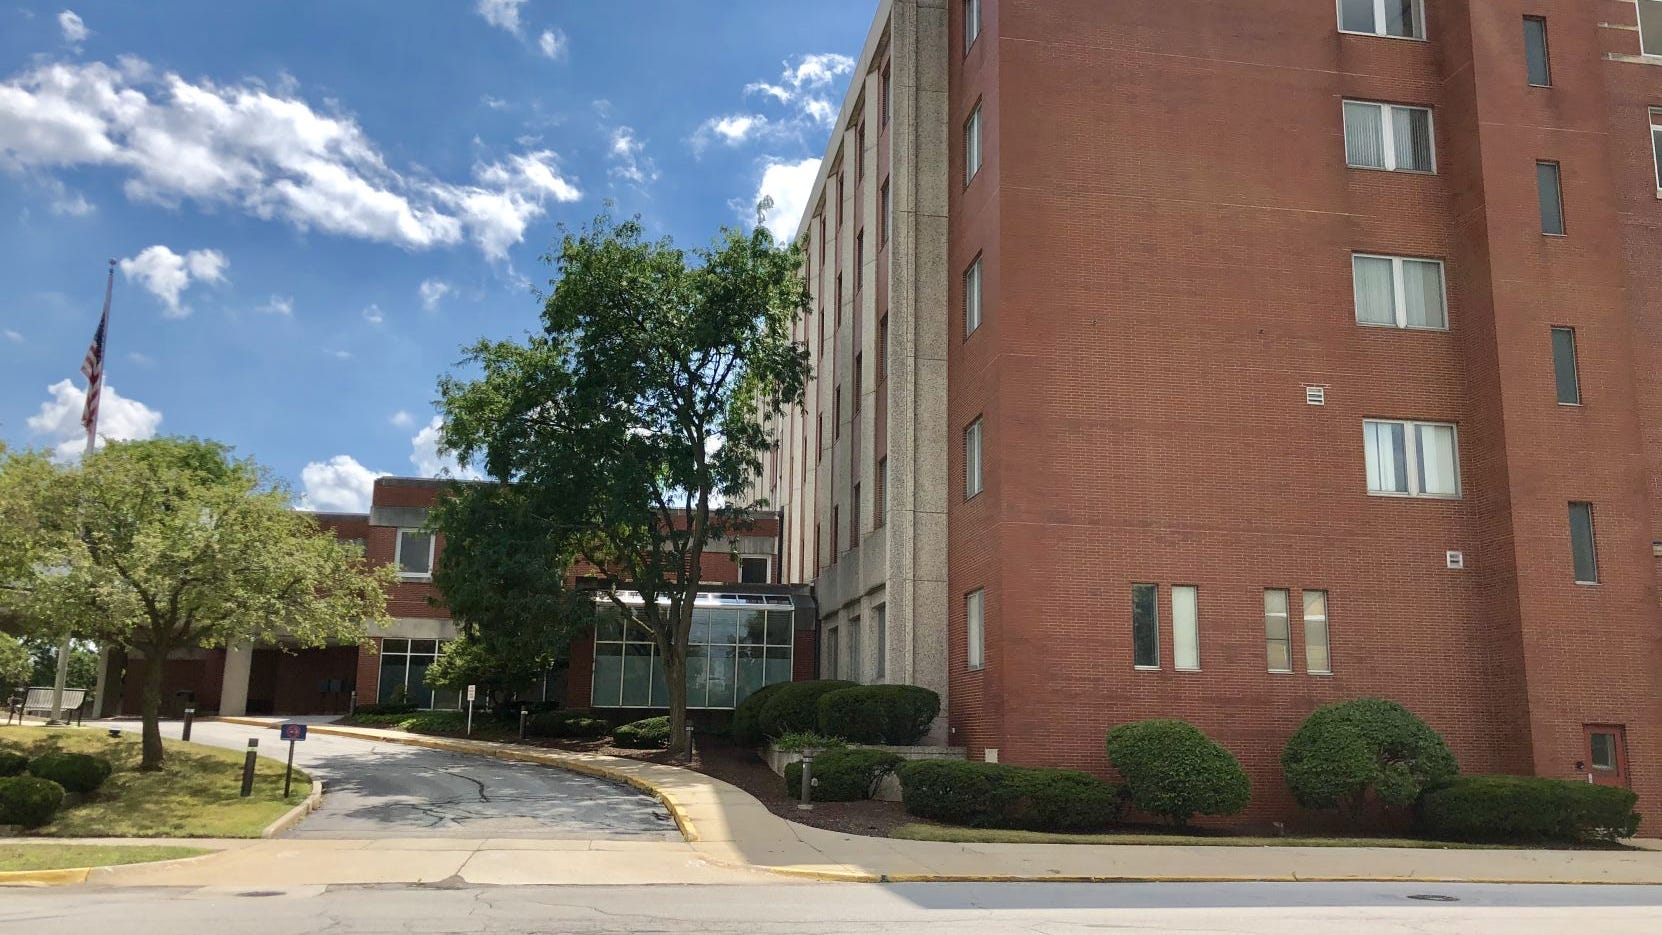 Downtown Mishawaka hospital site to be sold at auction Wednesday